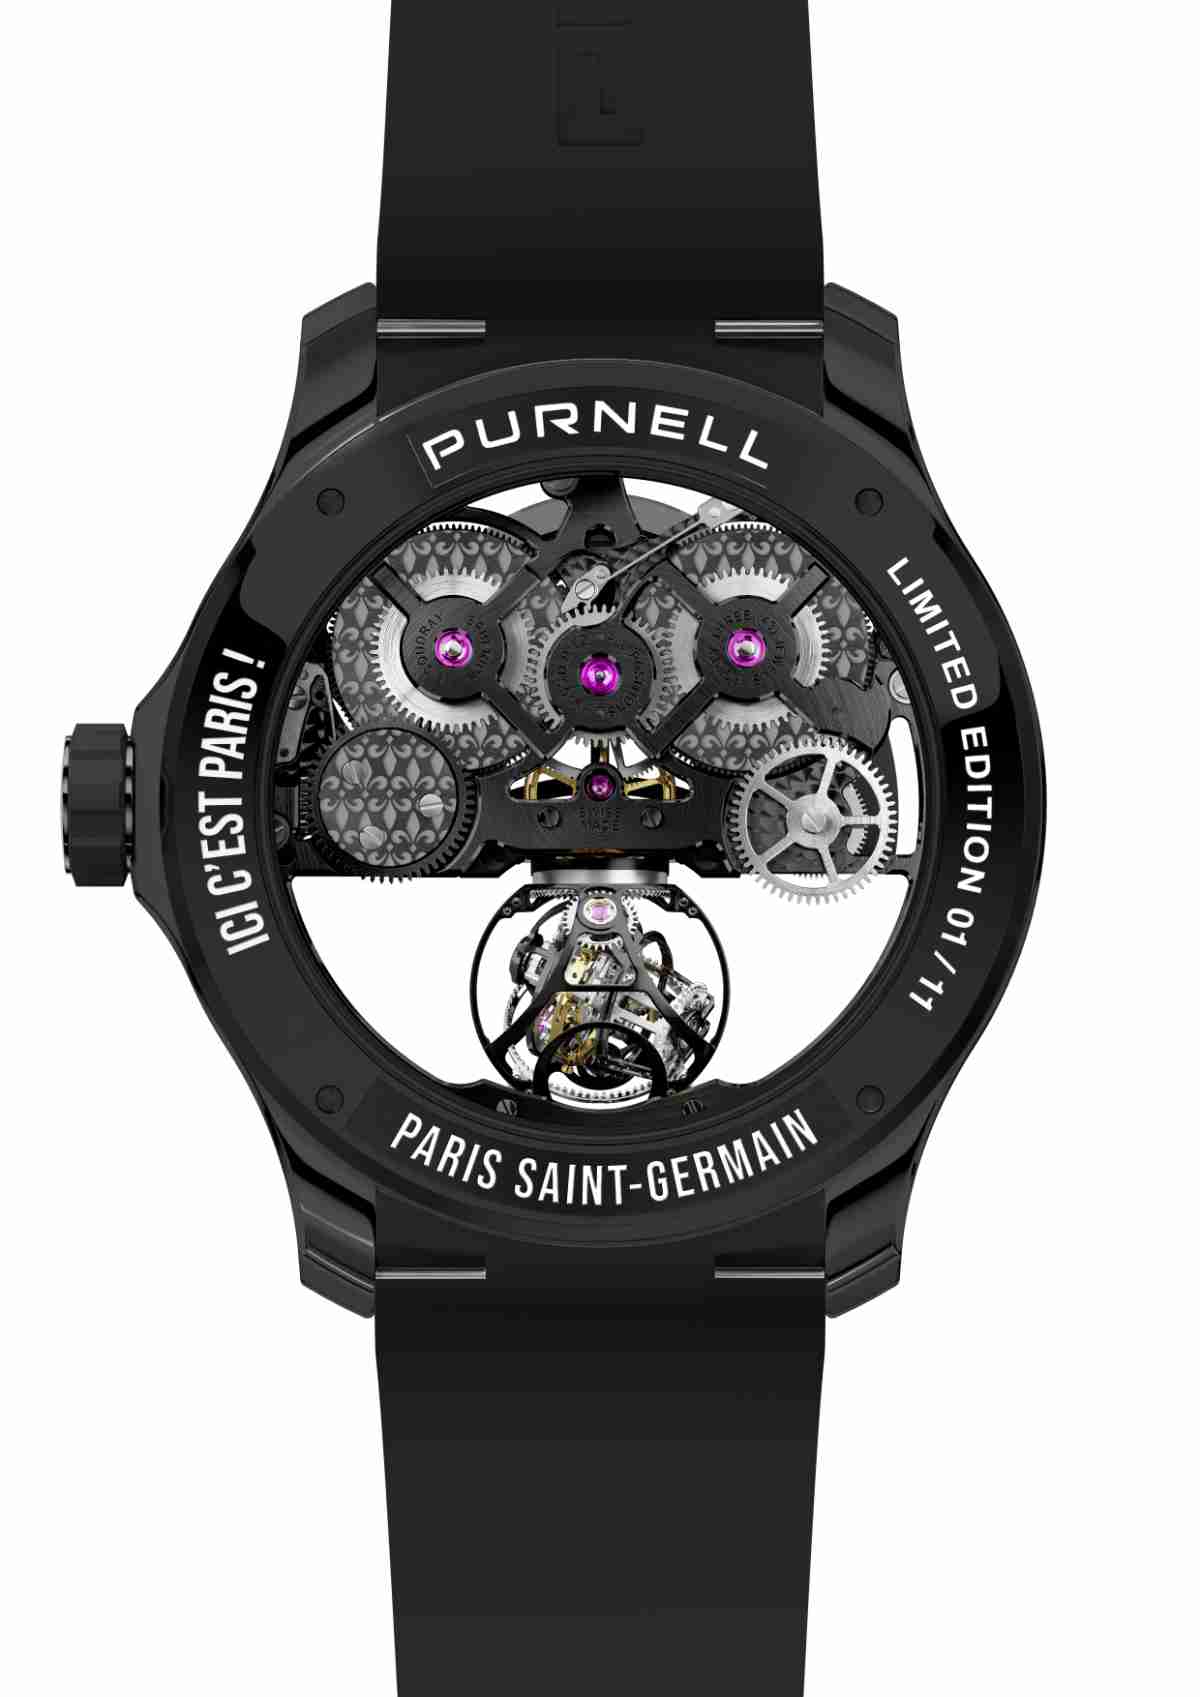 Paris Saint-Germain And Purnell Kicked Off Lifestyle Partnership With The New Purnell X PSG Limited